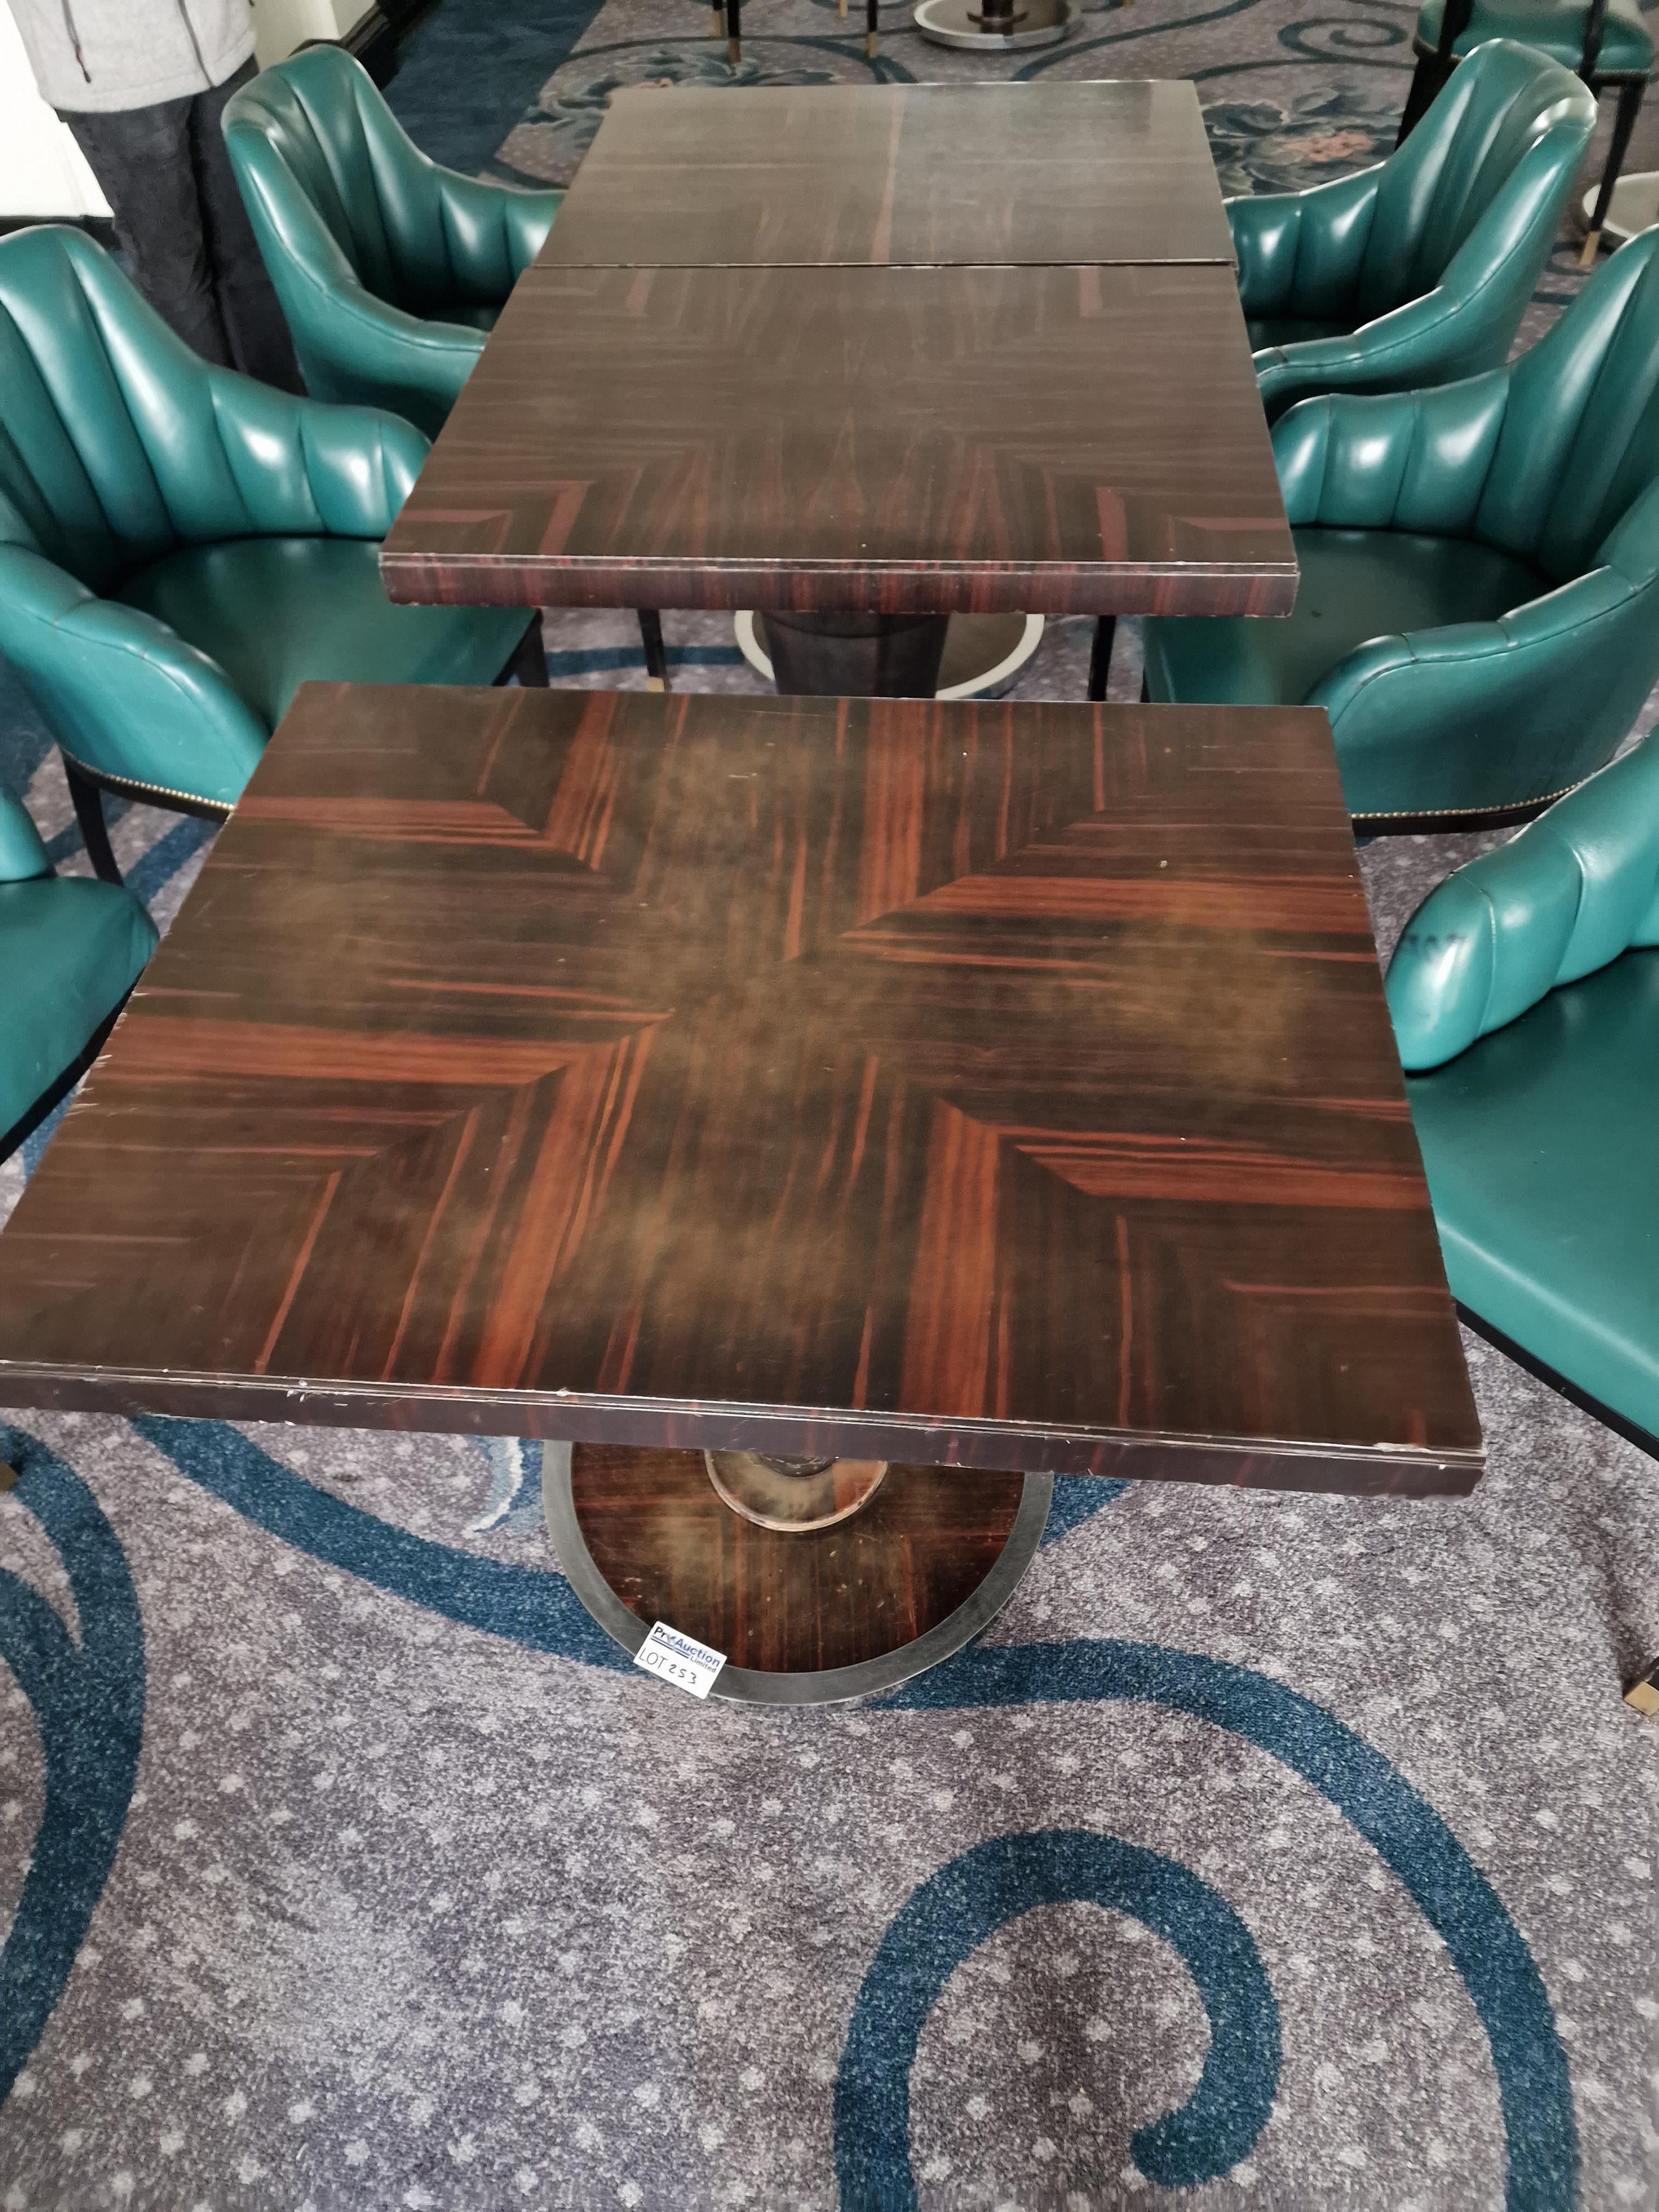 Rectangular dining table art deco style macassar ebony and palm veneer on solid timber frame